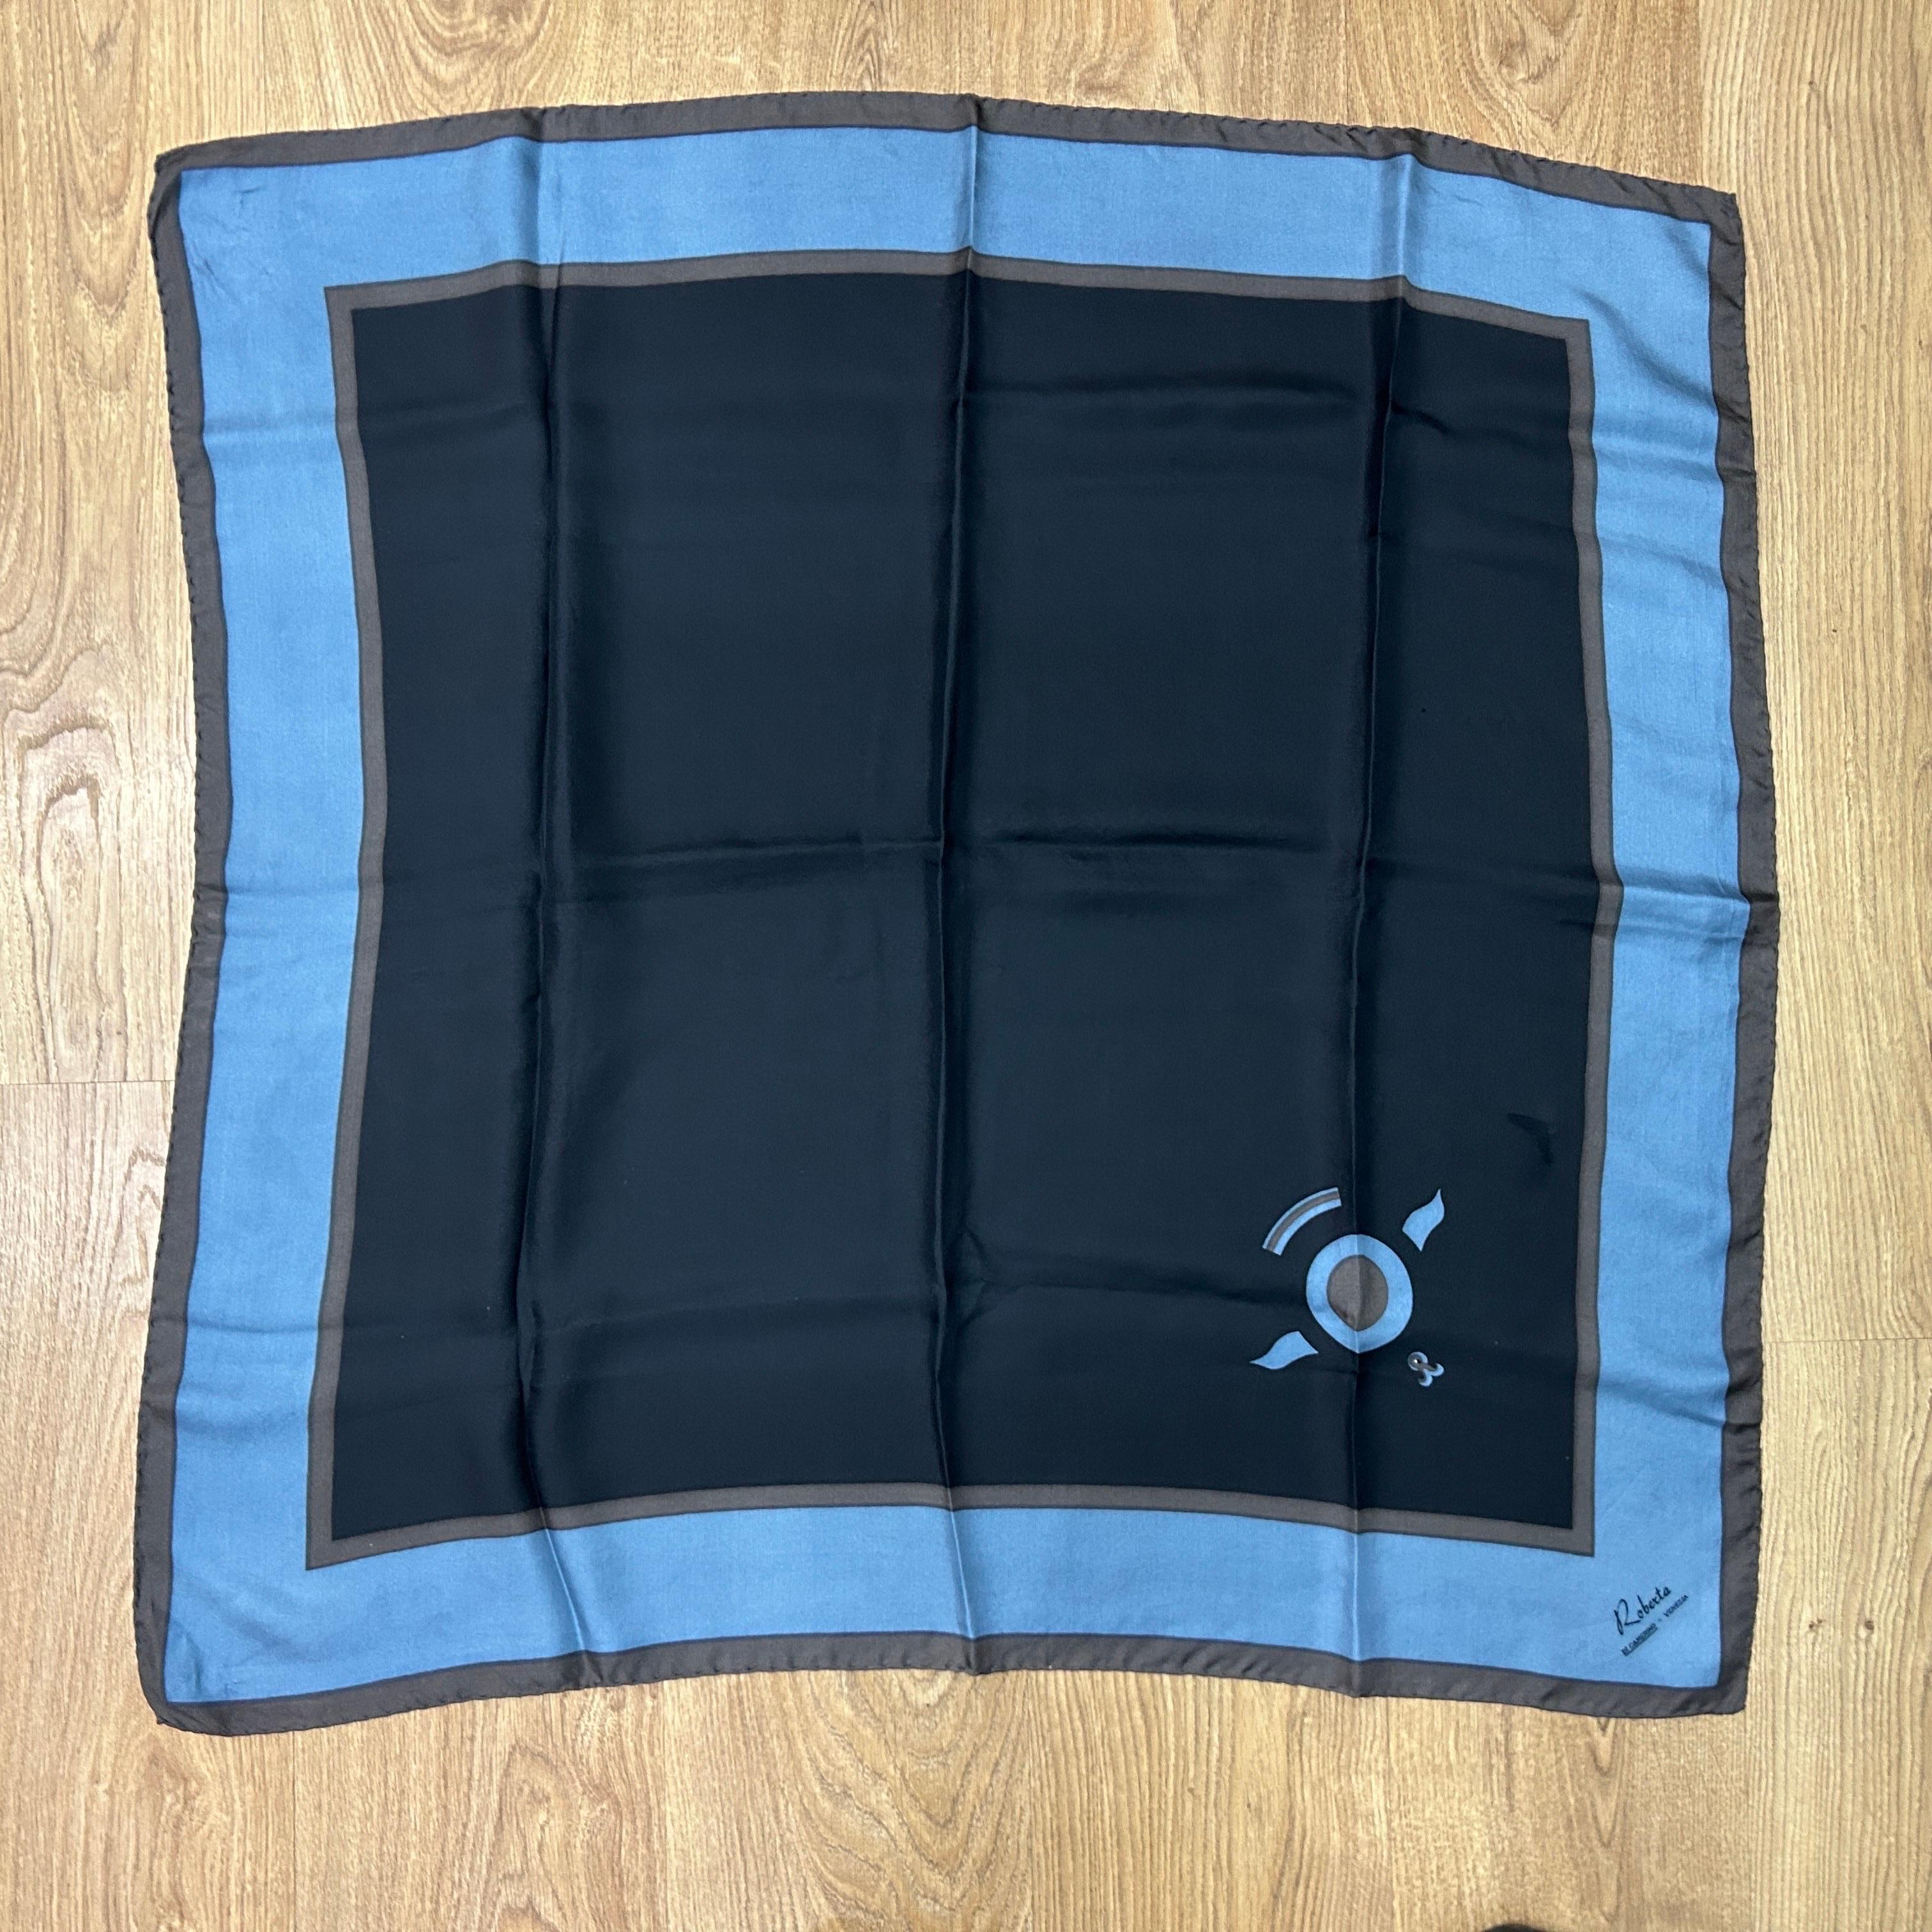 A very good condition silk foulard designed and manufactured in Italy by Roberta di Camerino in the Eighties.The Square Scarf by Roberta di Camerino is a beautiful and classic accessory. Roberta di Camerino is an Italian fashion brand known for its